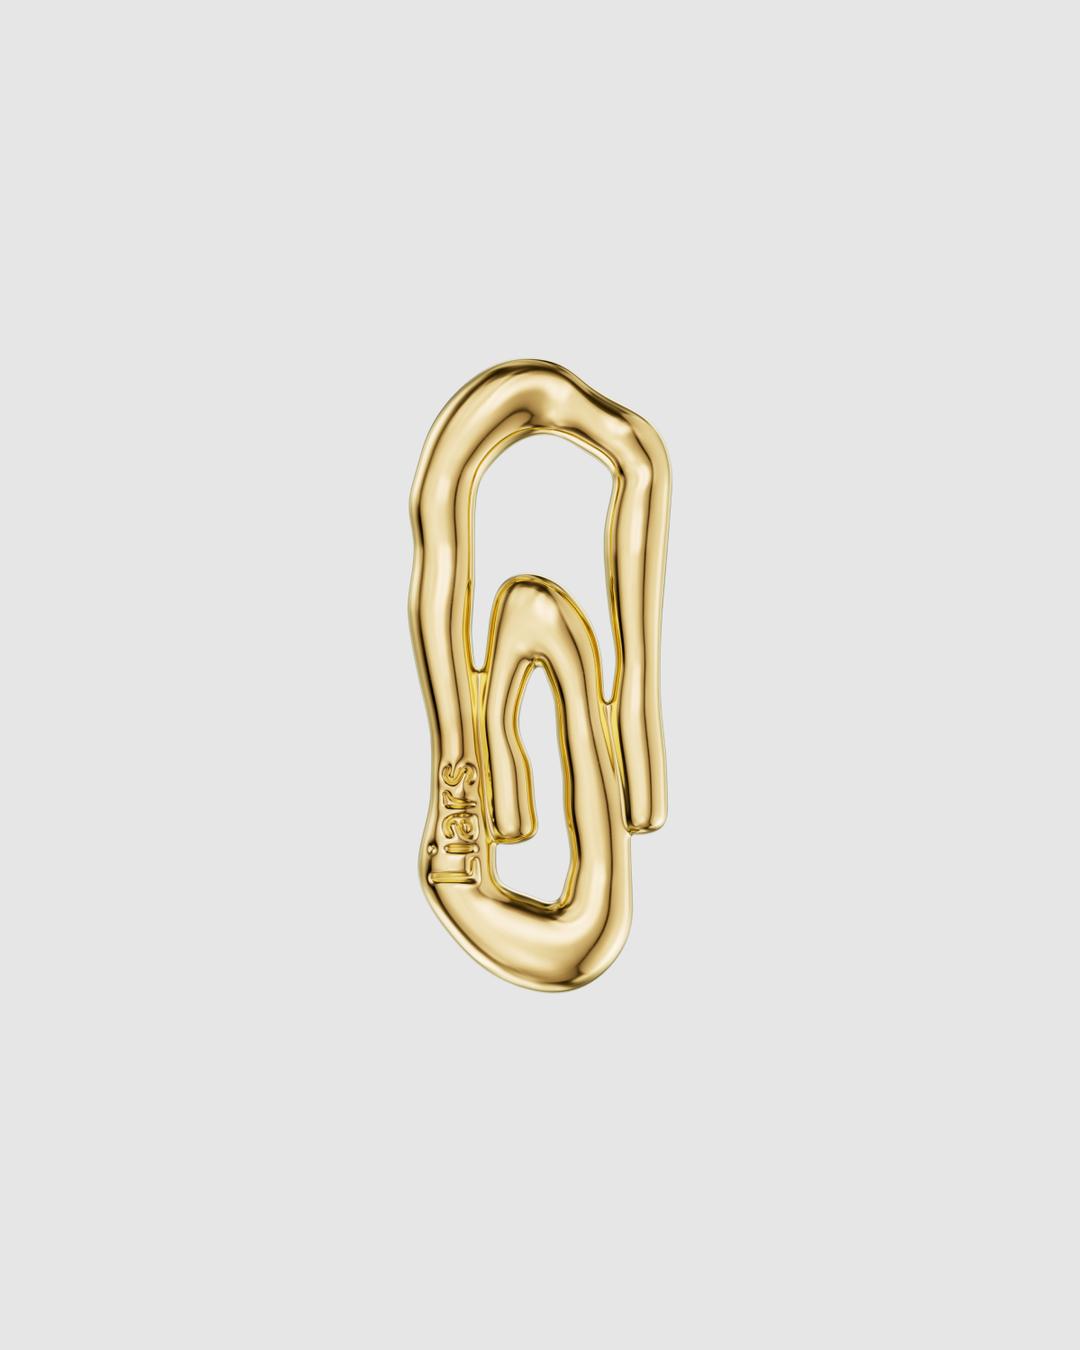 New Nature paper clip trinket with gold plating